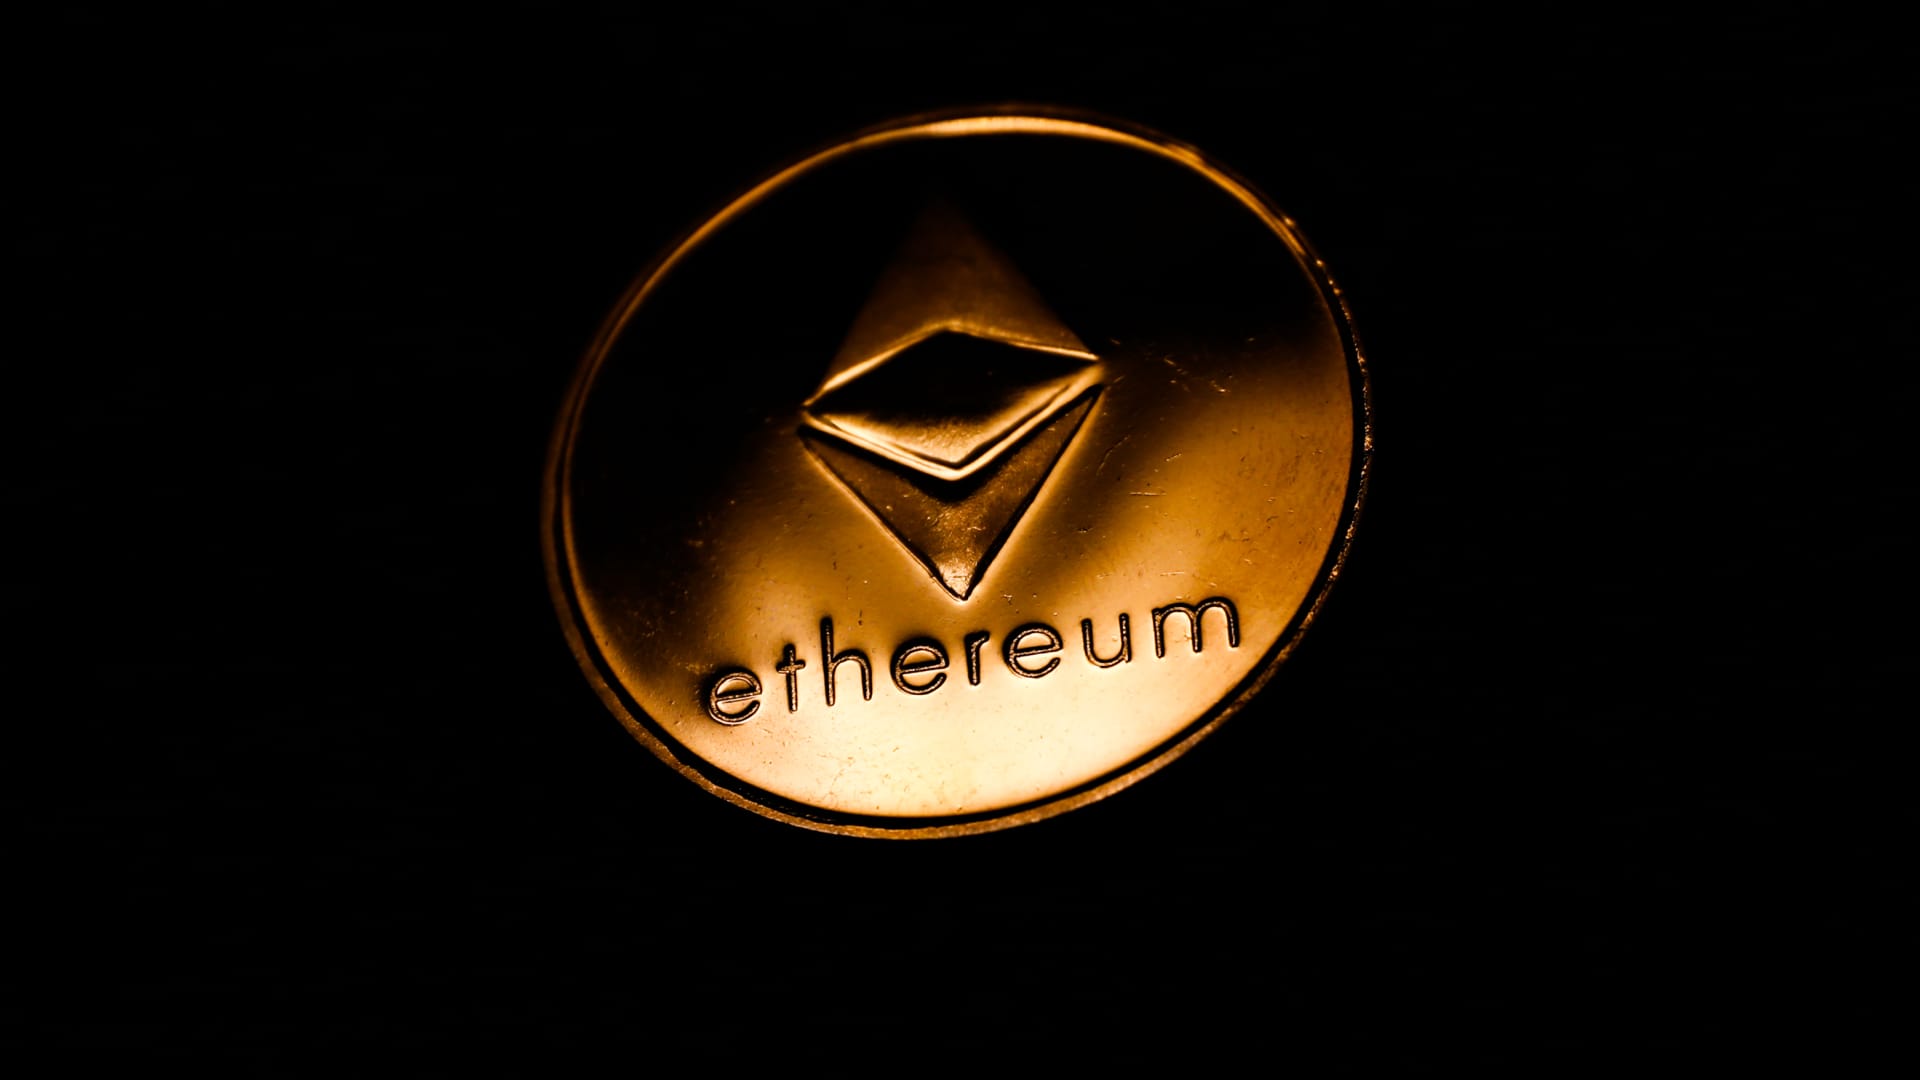 ether-is-rallying-ahead-of-major-upgrade-that-will-let-holders-more-easily-access-their-tokens